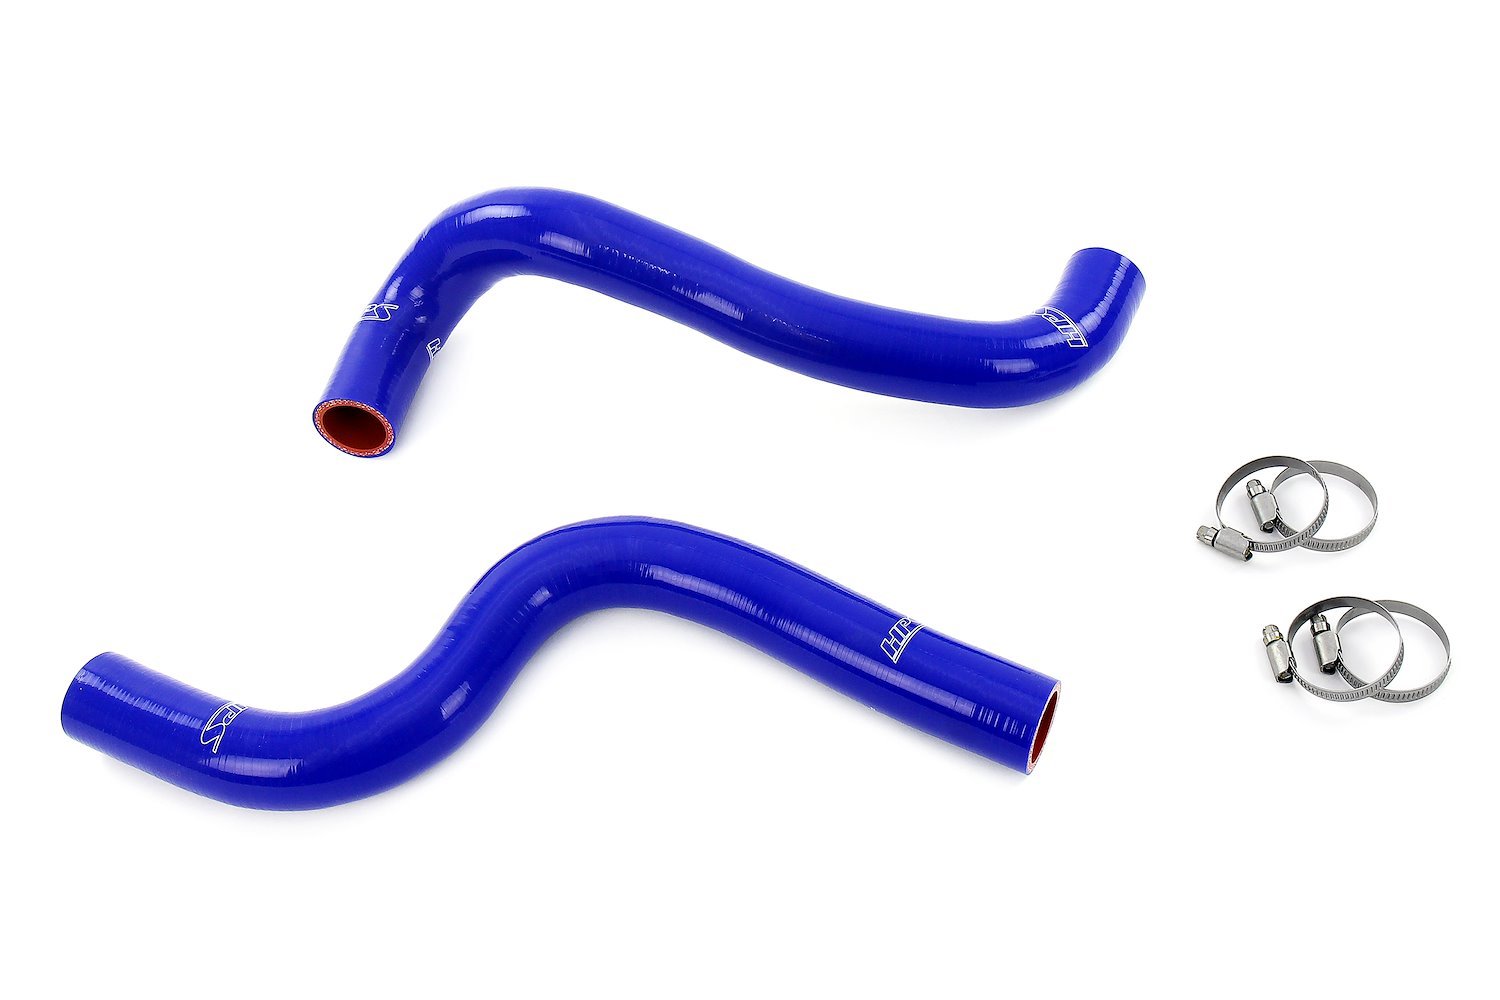 57-2101-BLUE Radiator Hose Kit, 3-Ply Reinforced Silicone, Replaces Rubber Radiator Coolant Hoses